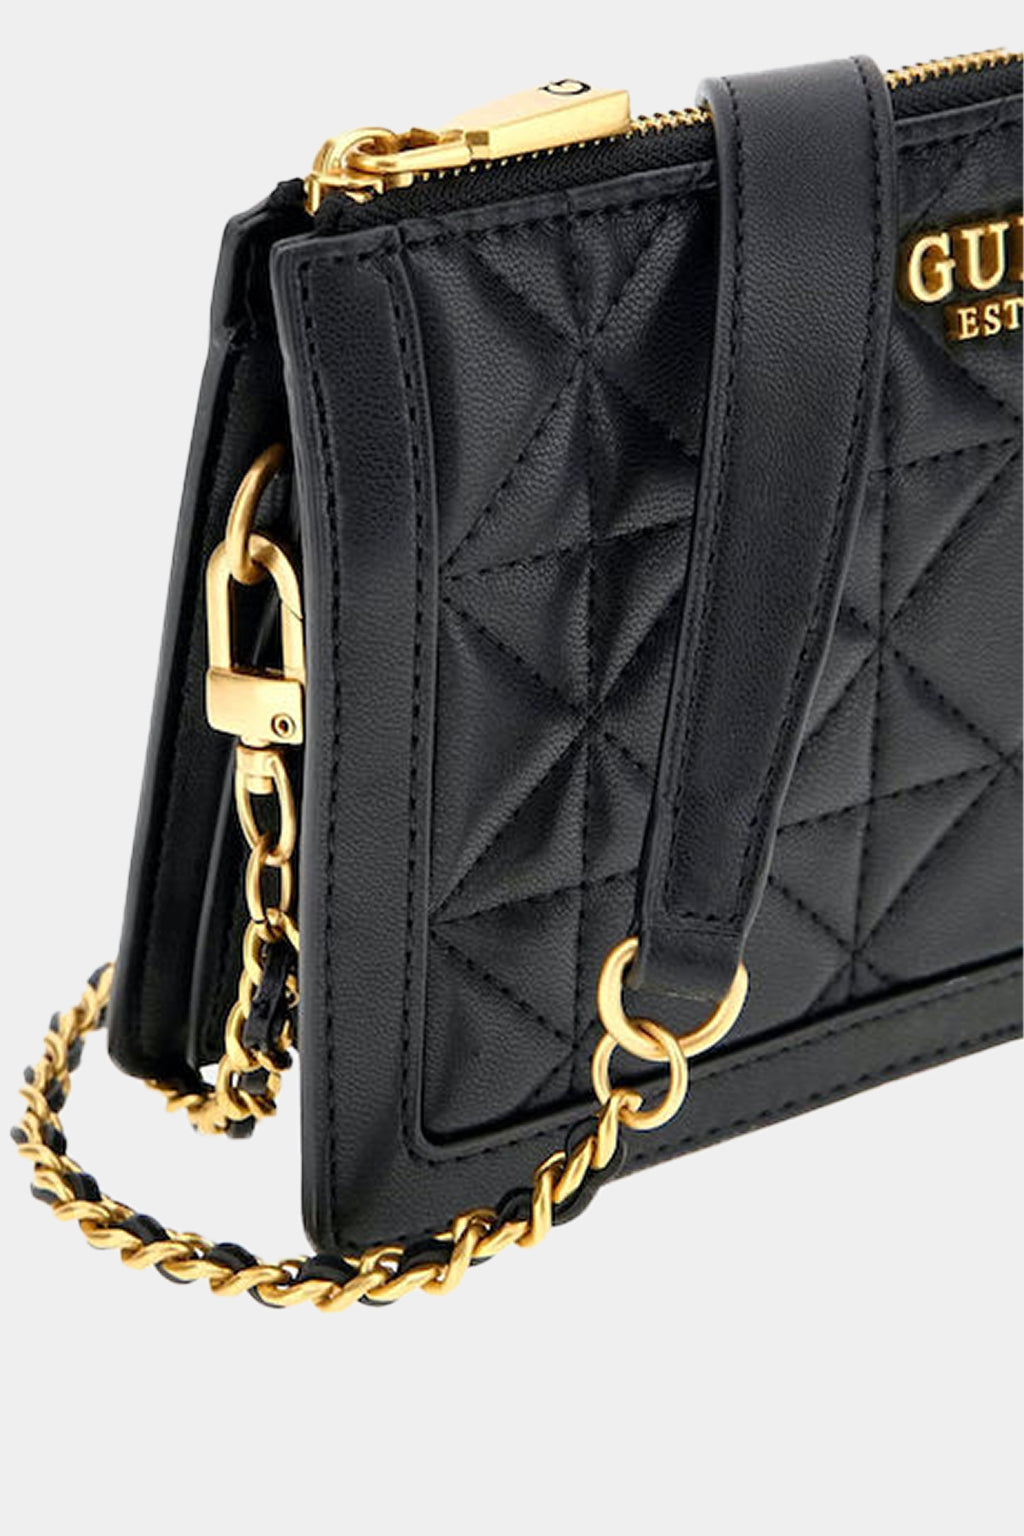 Guess -  Black Abey Multi Compartment Crossbody Bag